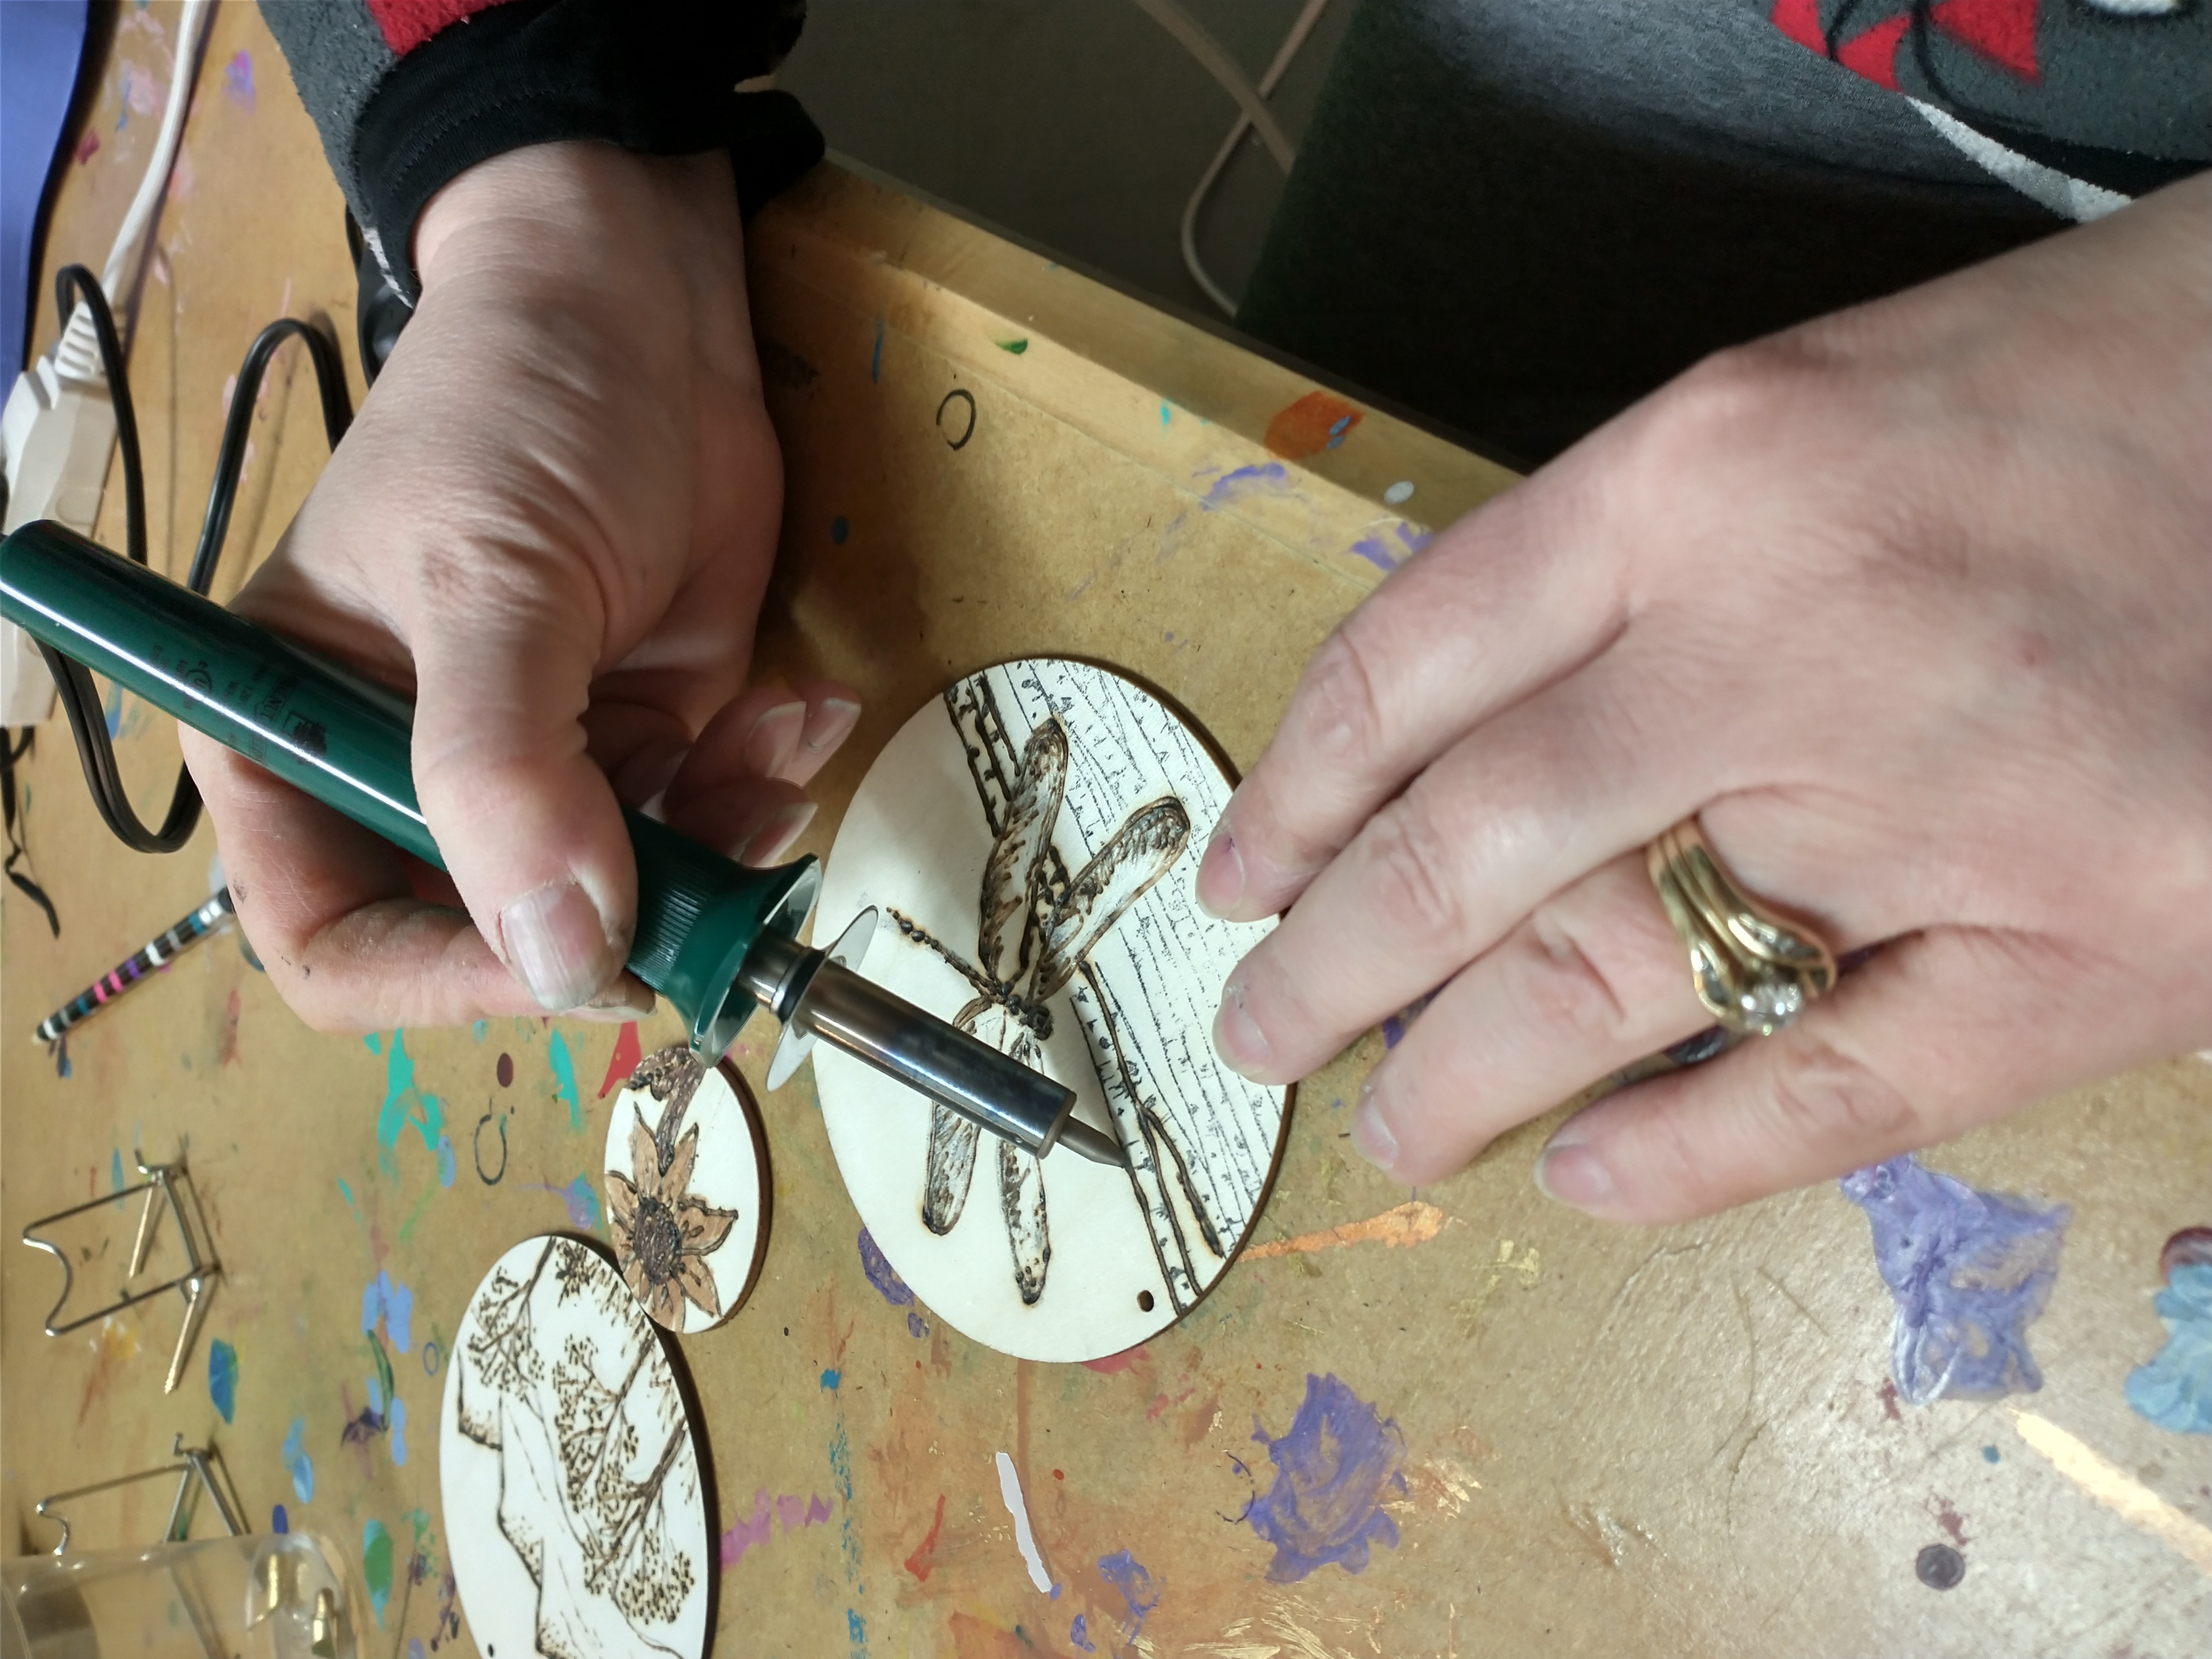 Introduction to Wood Burning Workshop Dec 15th - Pikes Peak Artist  Collective